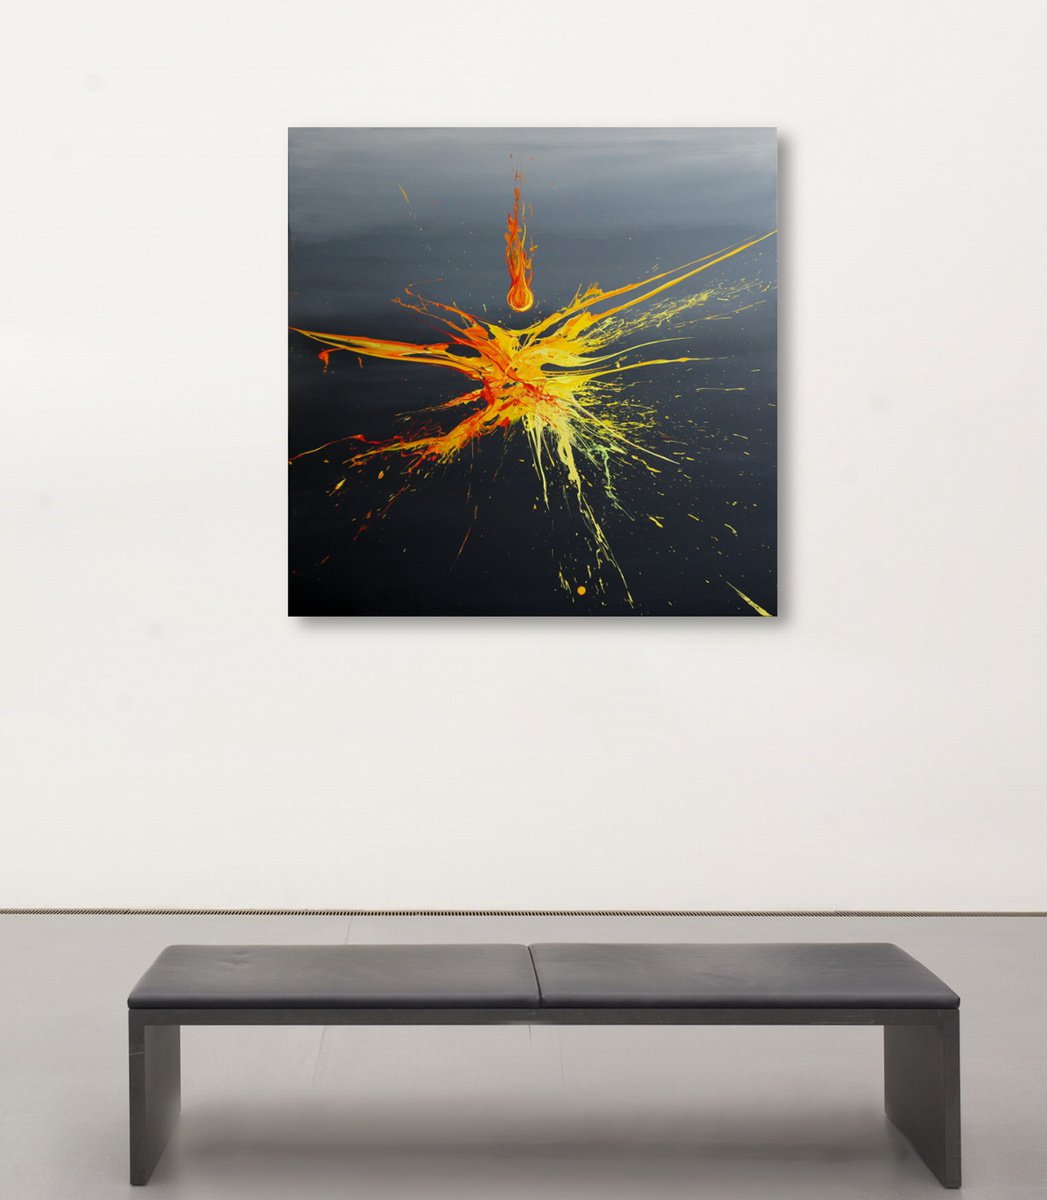 Cause And Effect (Spirits Of Skies 100163) (100 x 100 cm) XXL (40 x 40 inches) by Ansgar Dressler